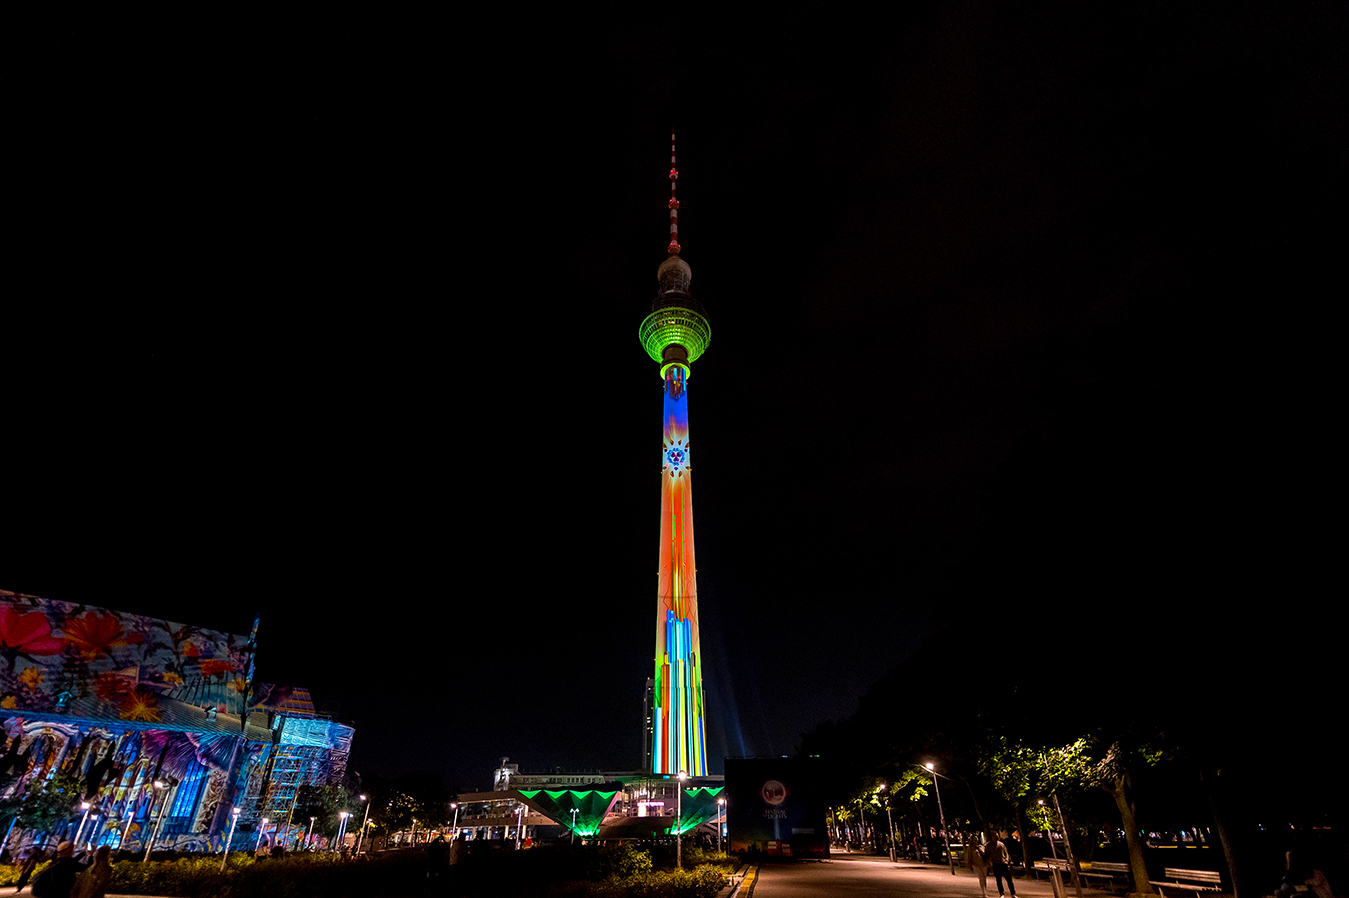 Evolve Love projection mapping Berlin TV Tower